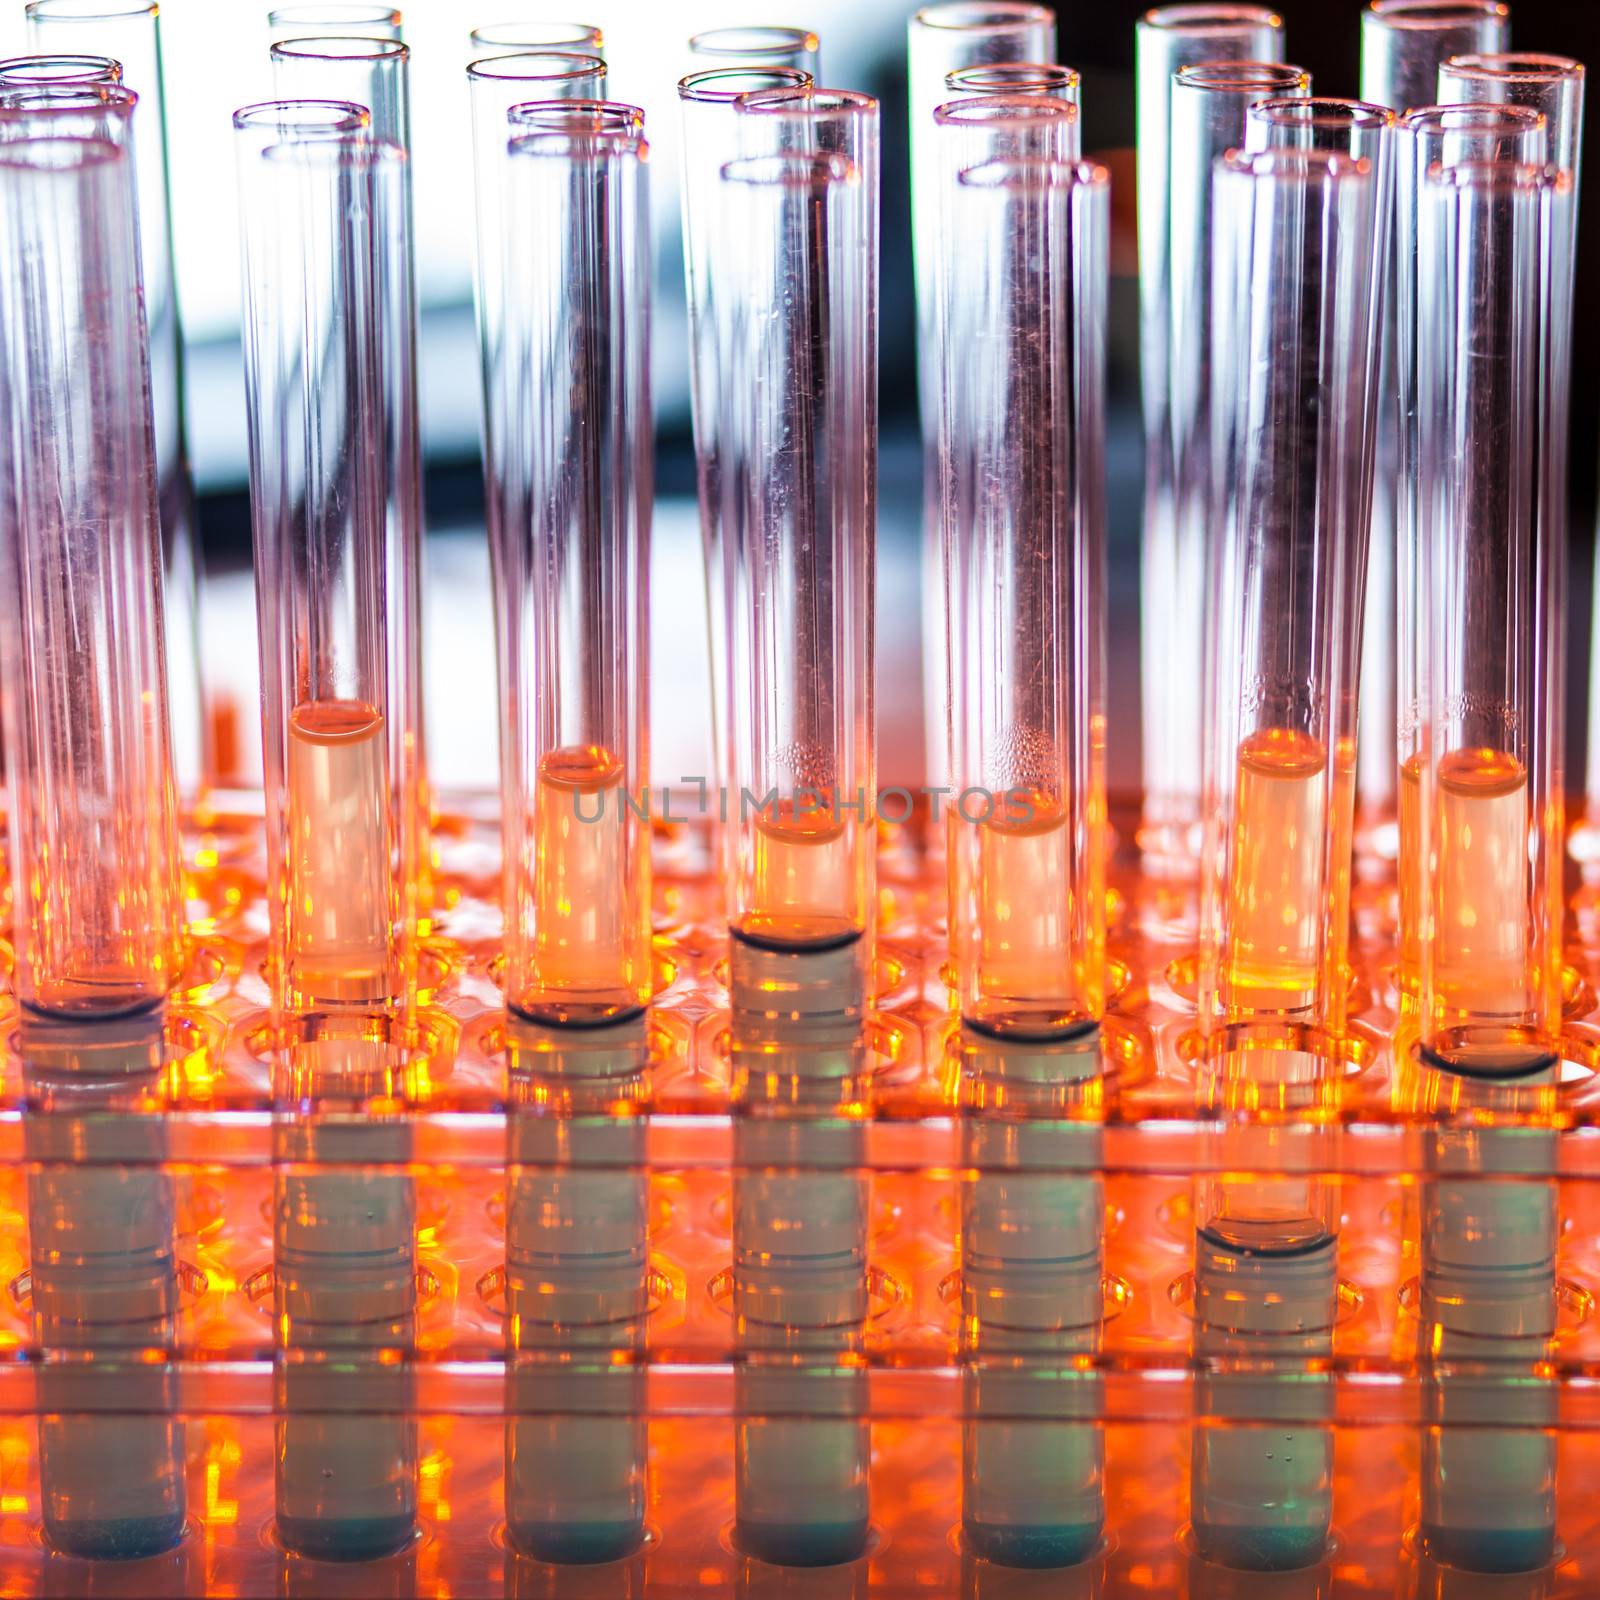 Laboratory glass test tubes filled with liquid chemical on a rack for an experiment in a science research lab.